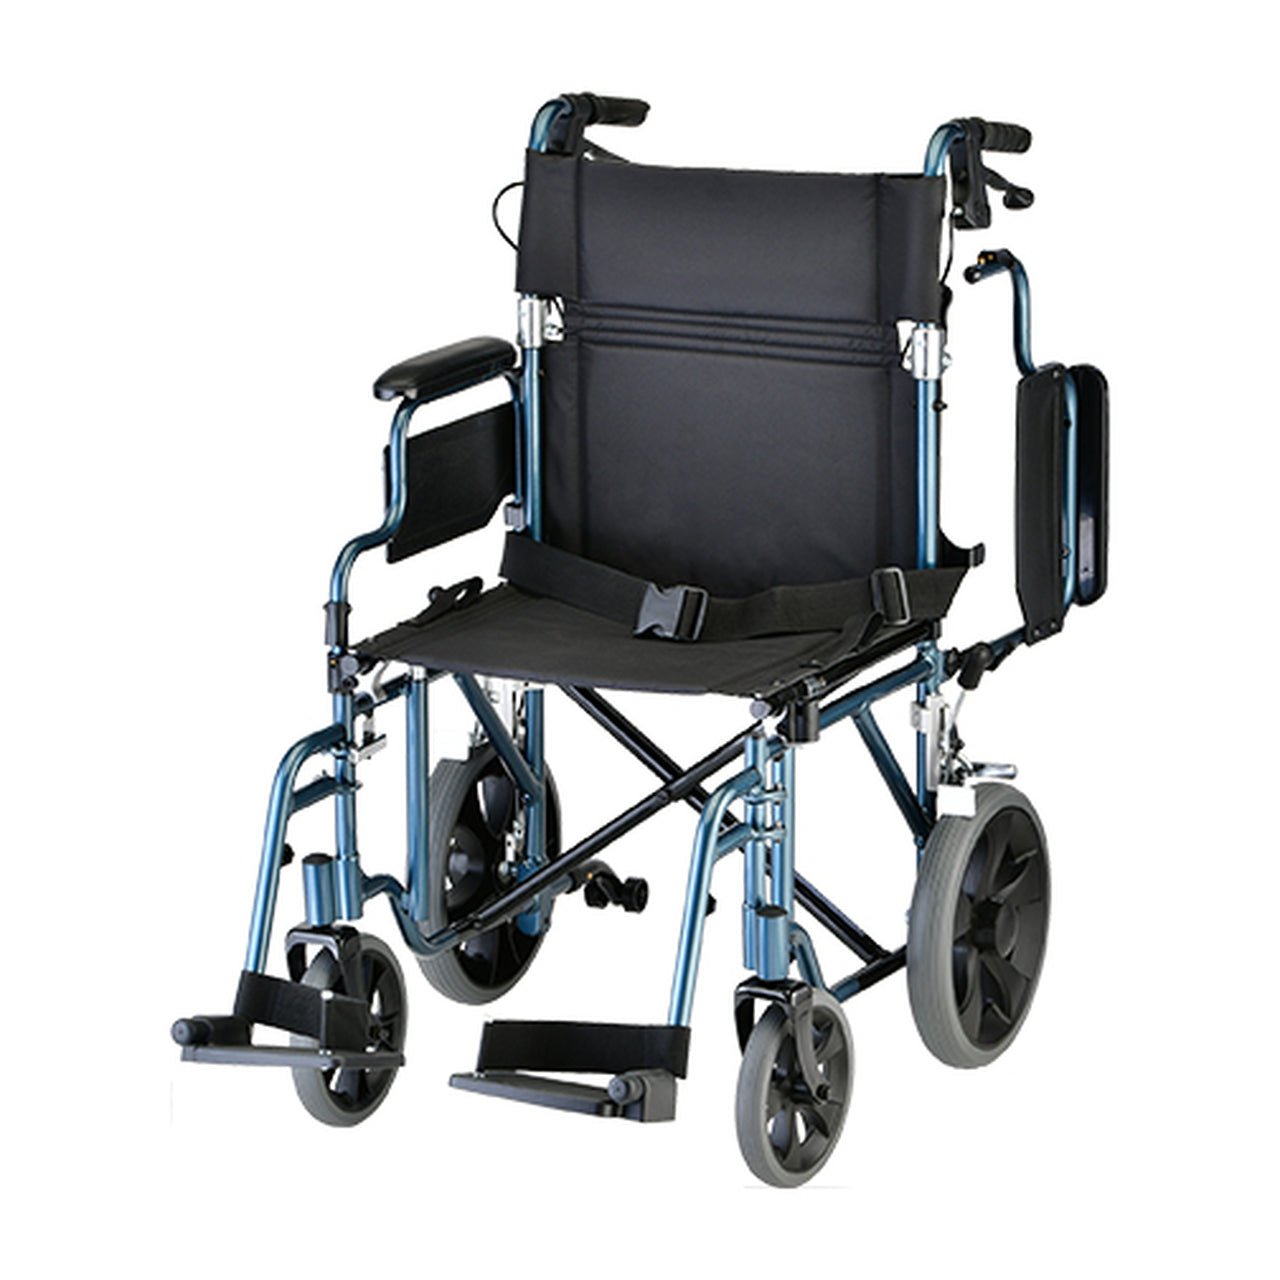 Nova 352 Comet Lightweight Transport Chair 19" with 12" Rear Wheels(Online Only) - Midwest DME Supply